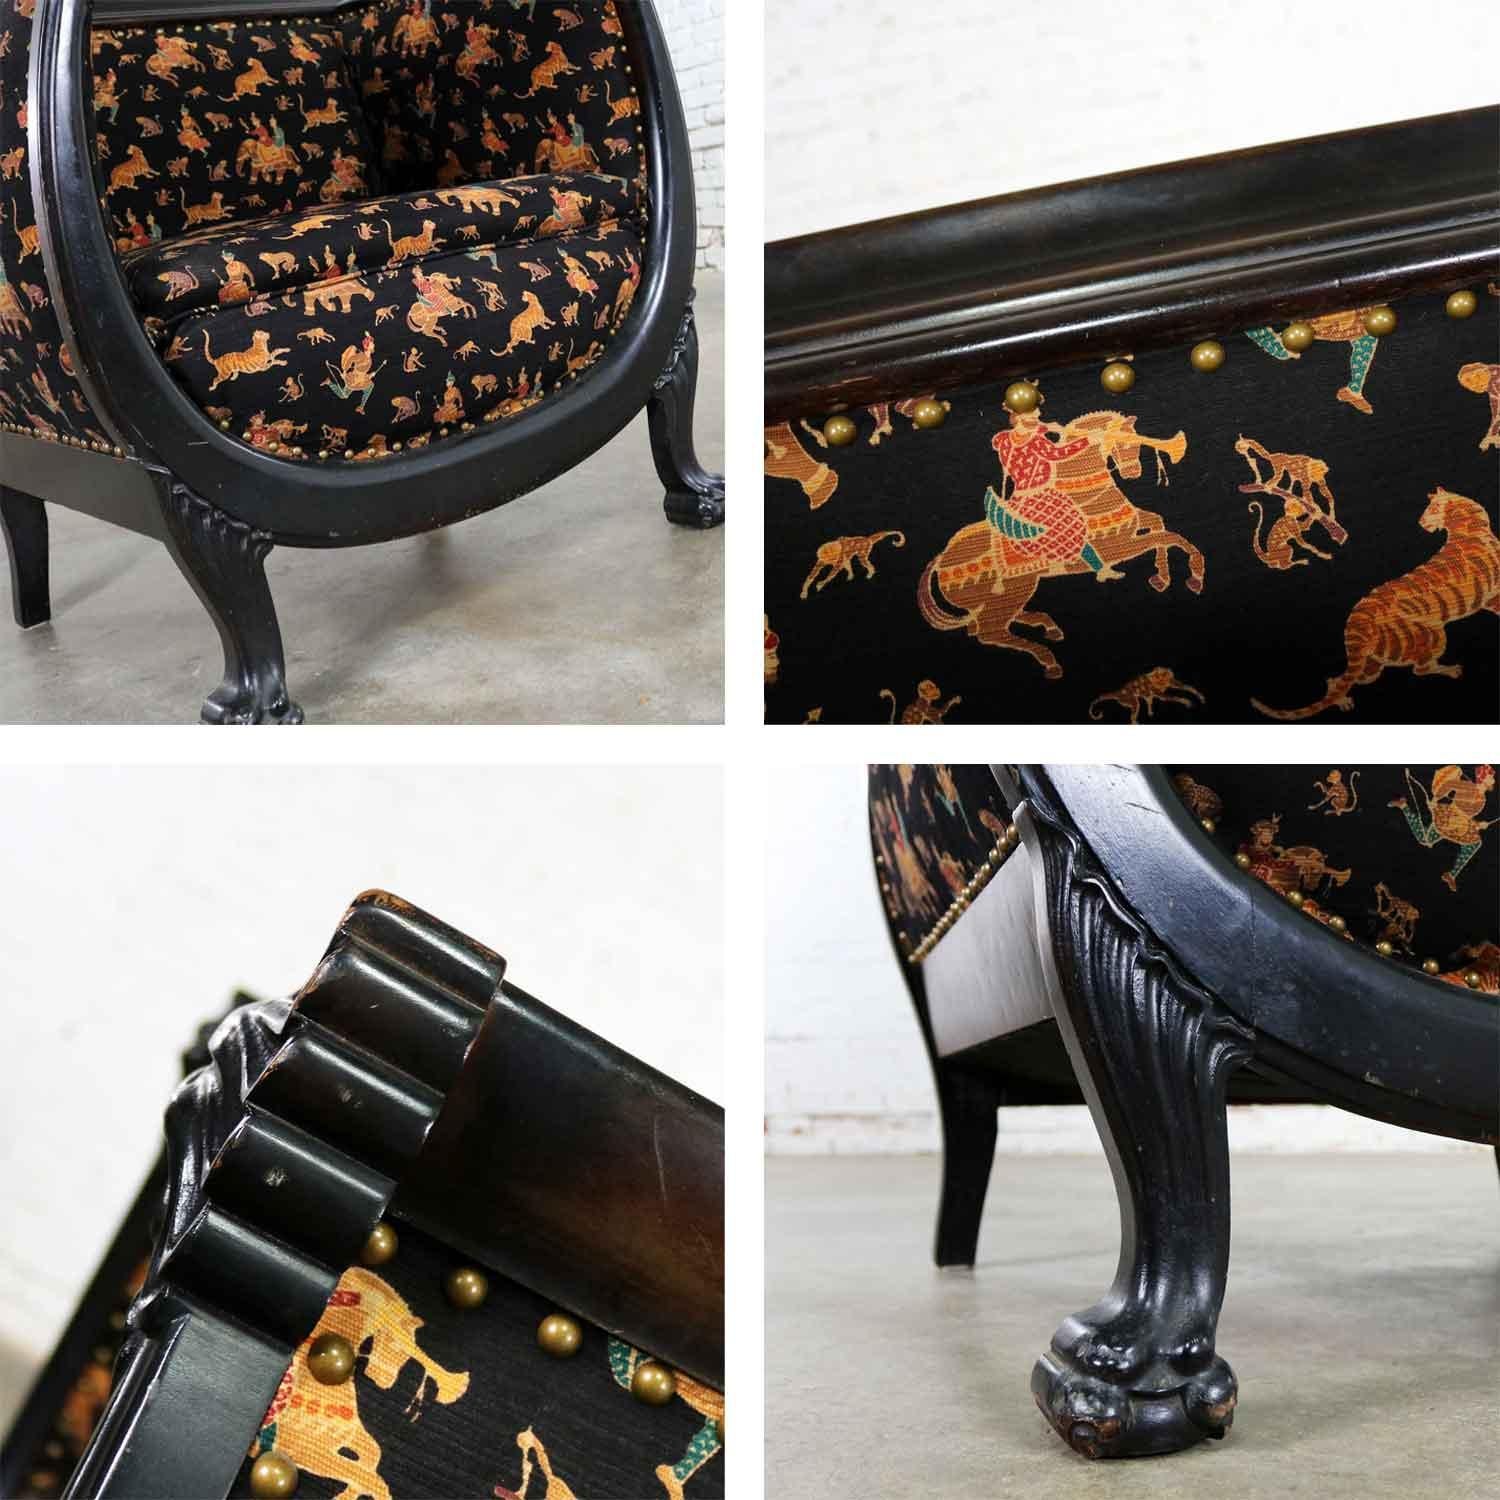 Handsome Victorian hand carved wishbone barrel chair with lion’s heads and lion’s claw feet. It has been ebonized and recently reupholstered with a black gaberdine like fabric. It is in wonderful condition with nice wear spots on the blackened wood,